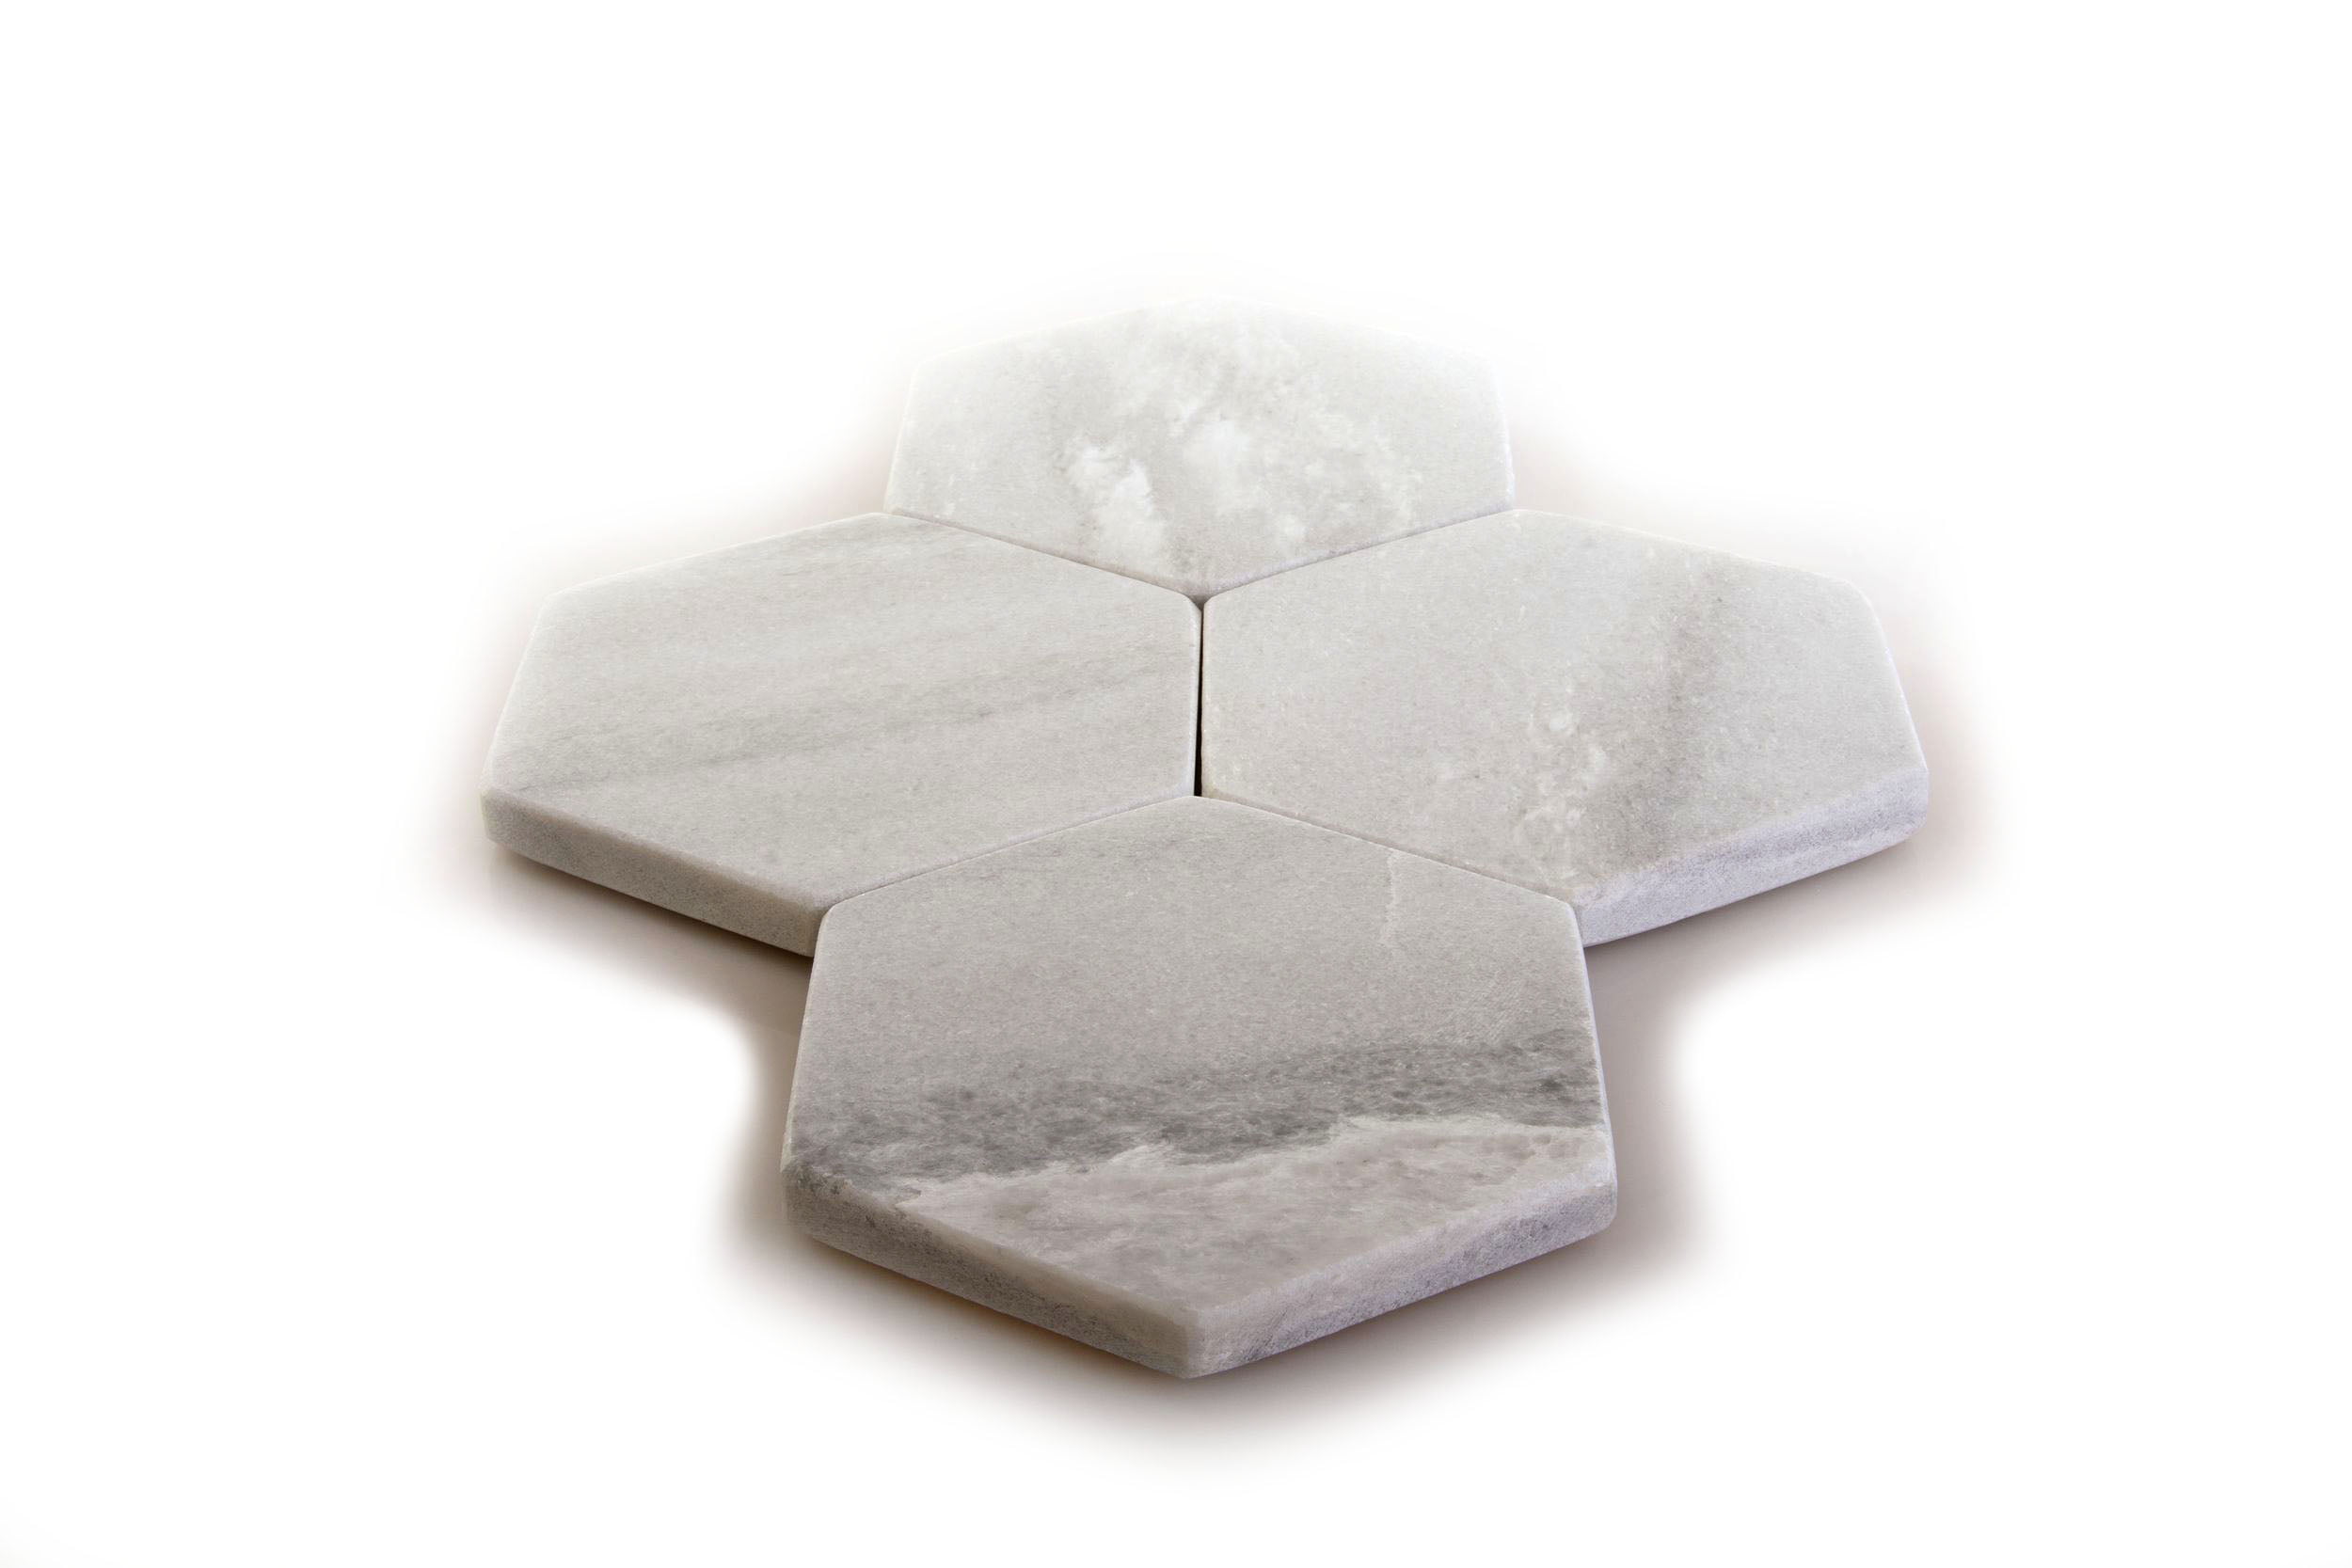 Pack of 6 Hexagon Natural Slate Drinks Coasters